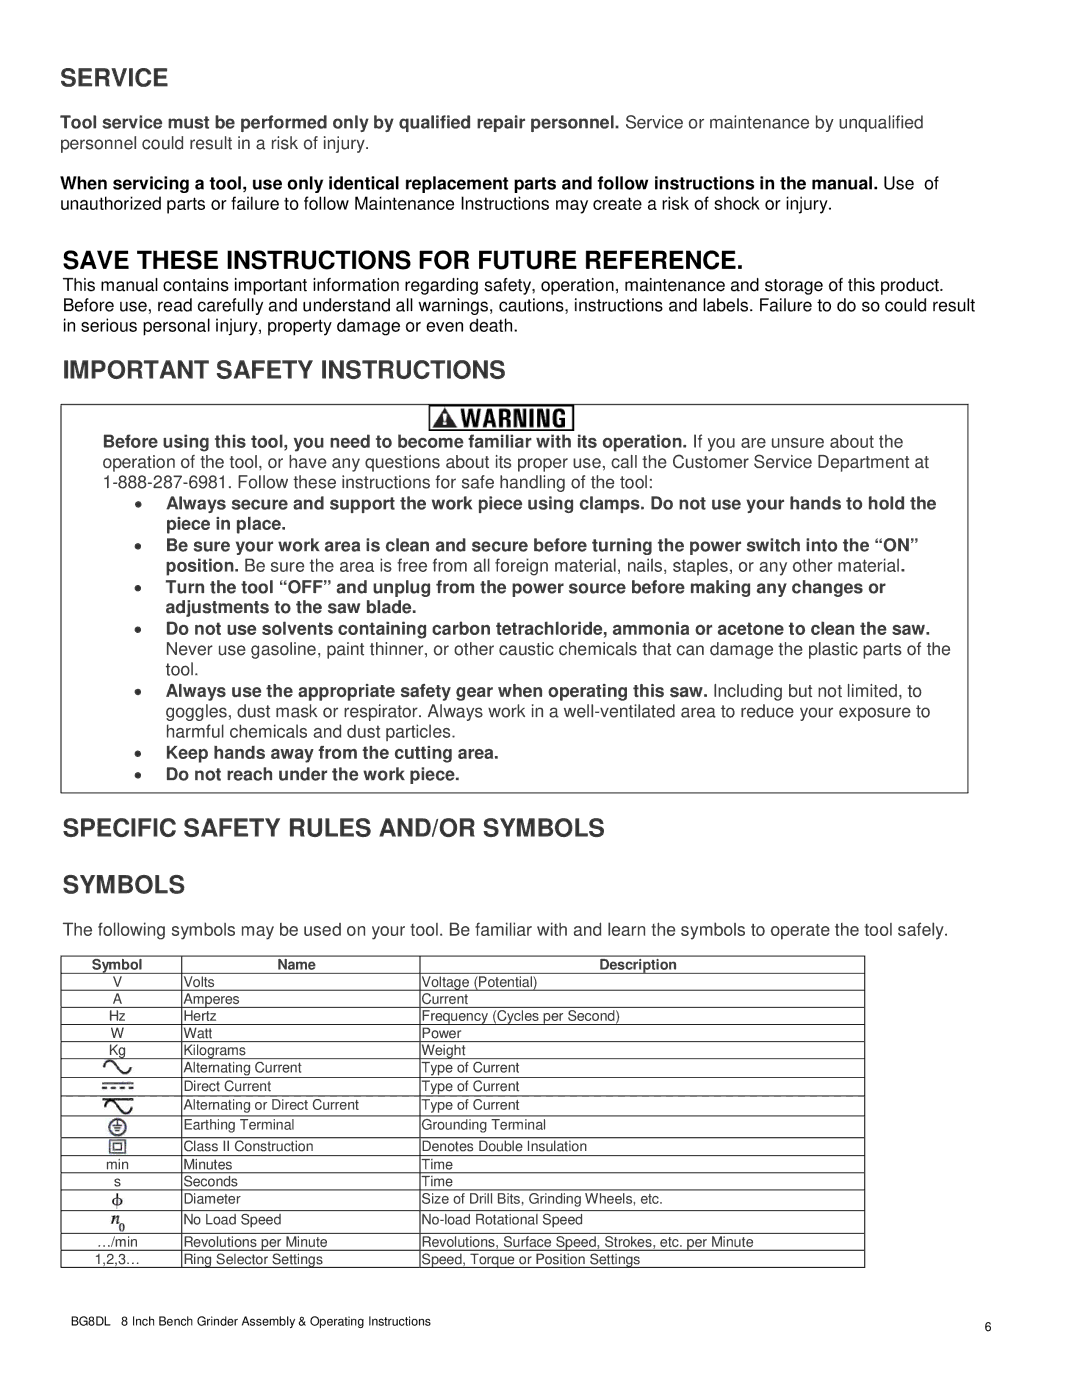 Buffalo Tools BG8DL Service, Save These Instructions for Future Reference, Important Safety Instructions 